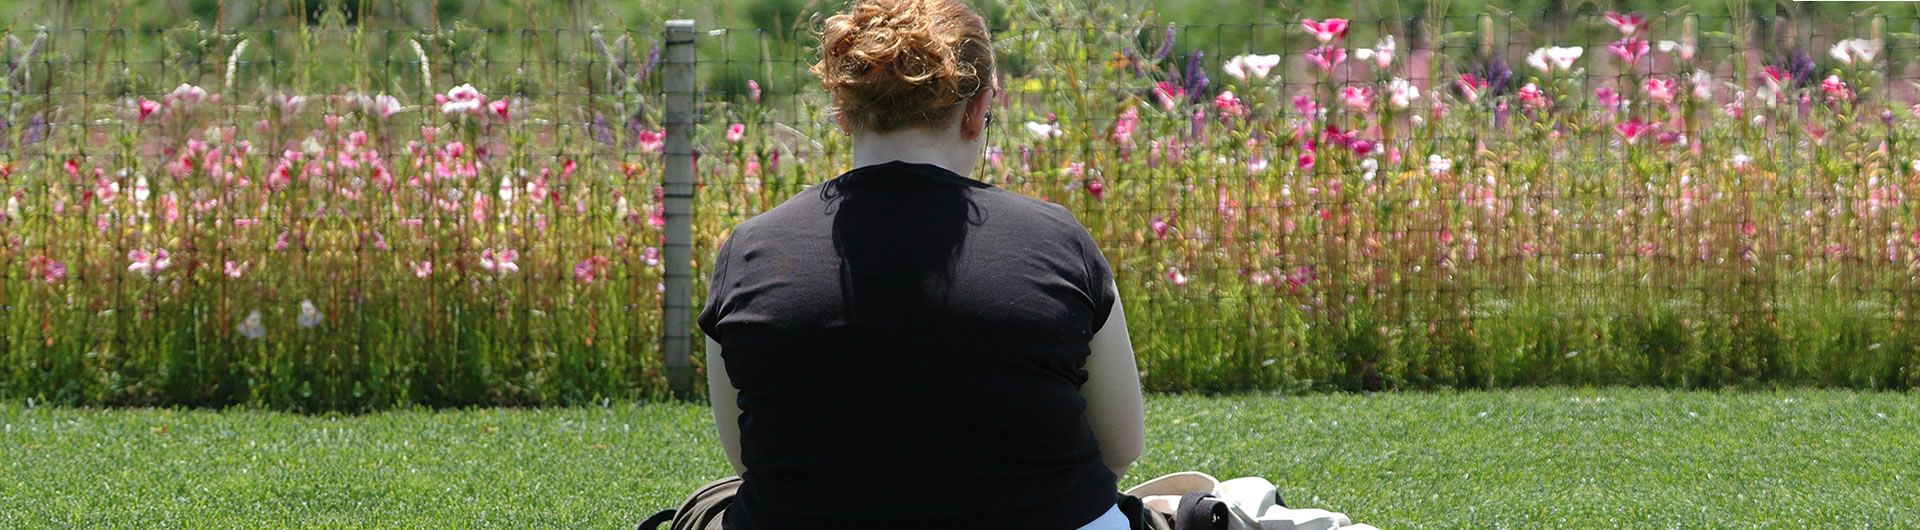 Overweight teenage girl sitting in park